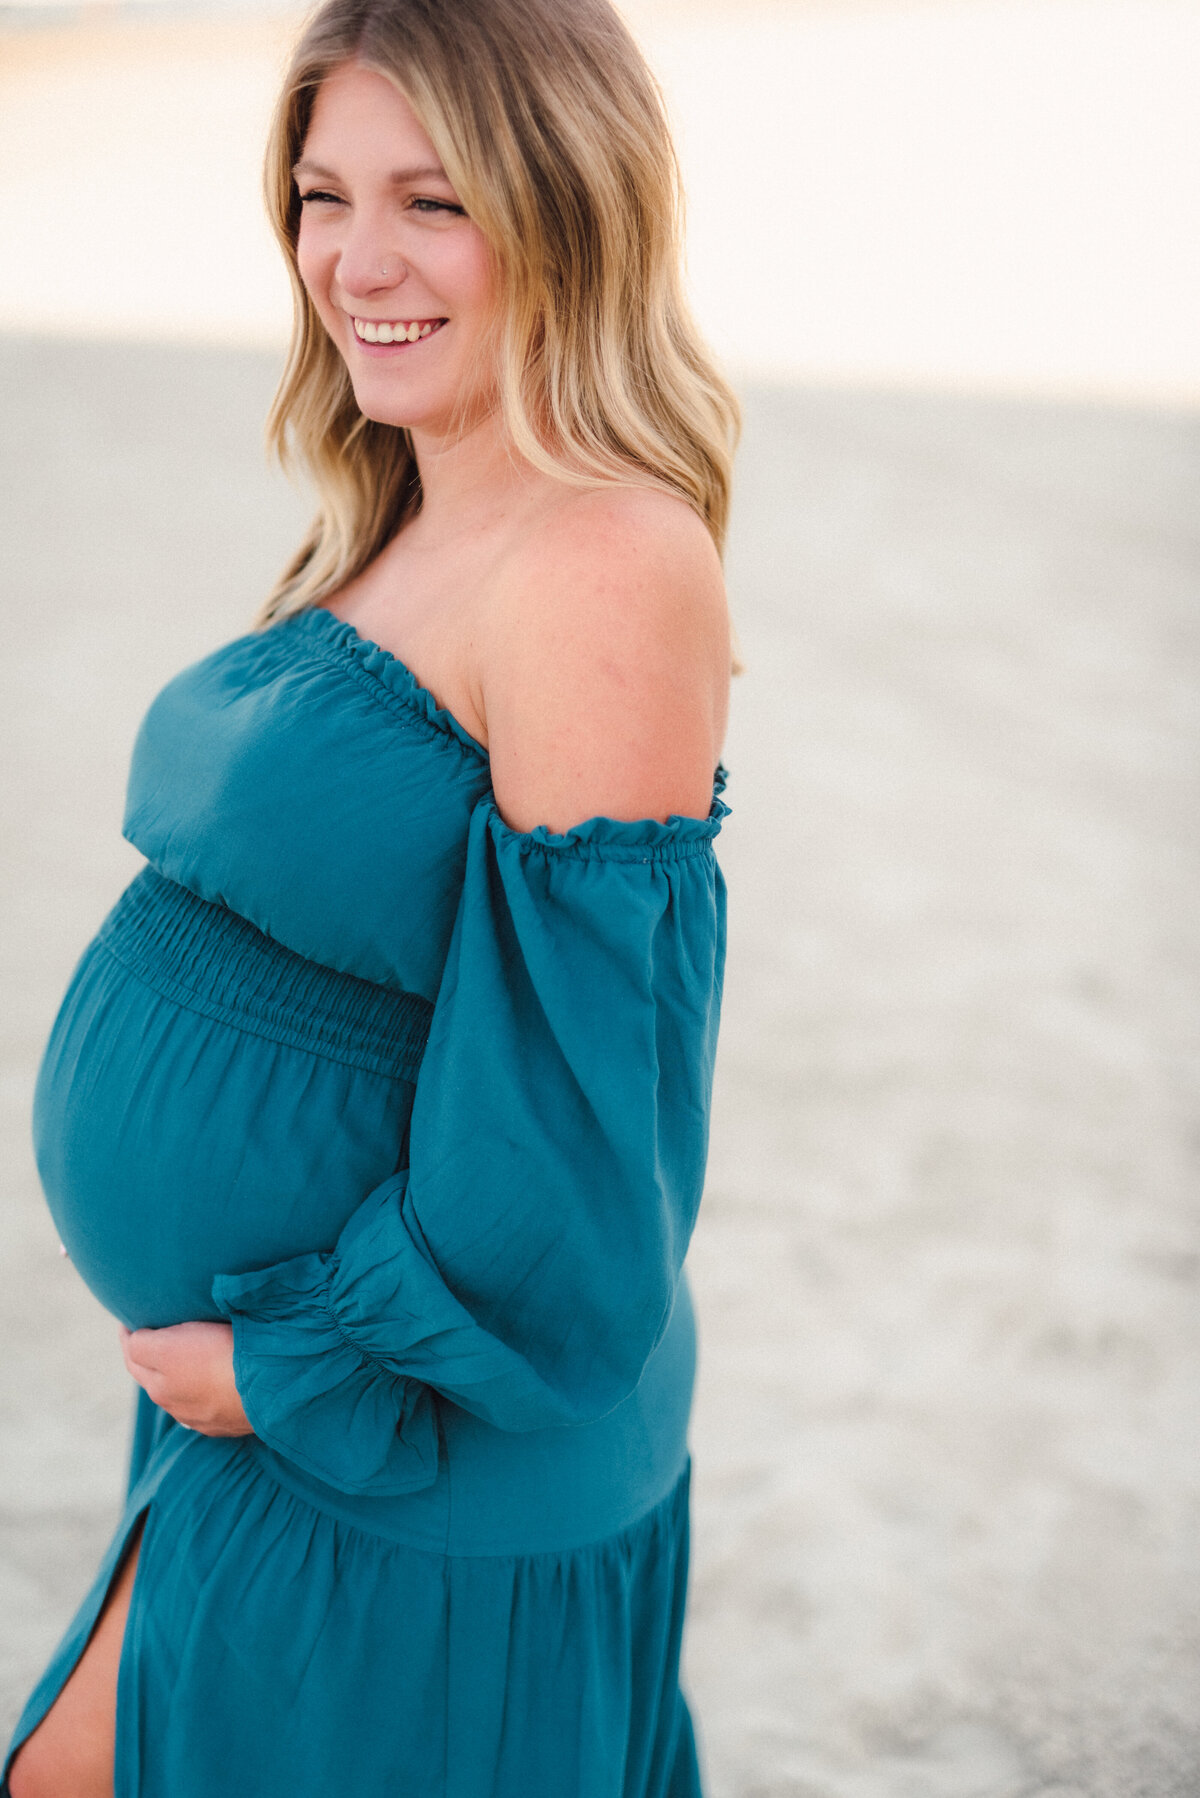 beach-maternity-photography-session00003